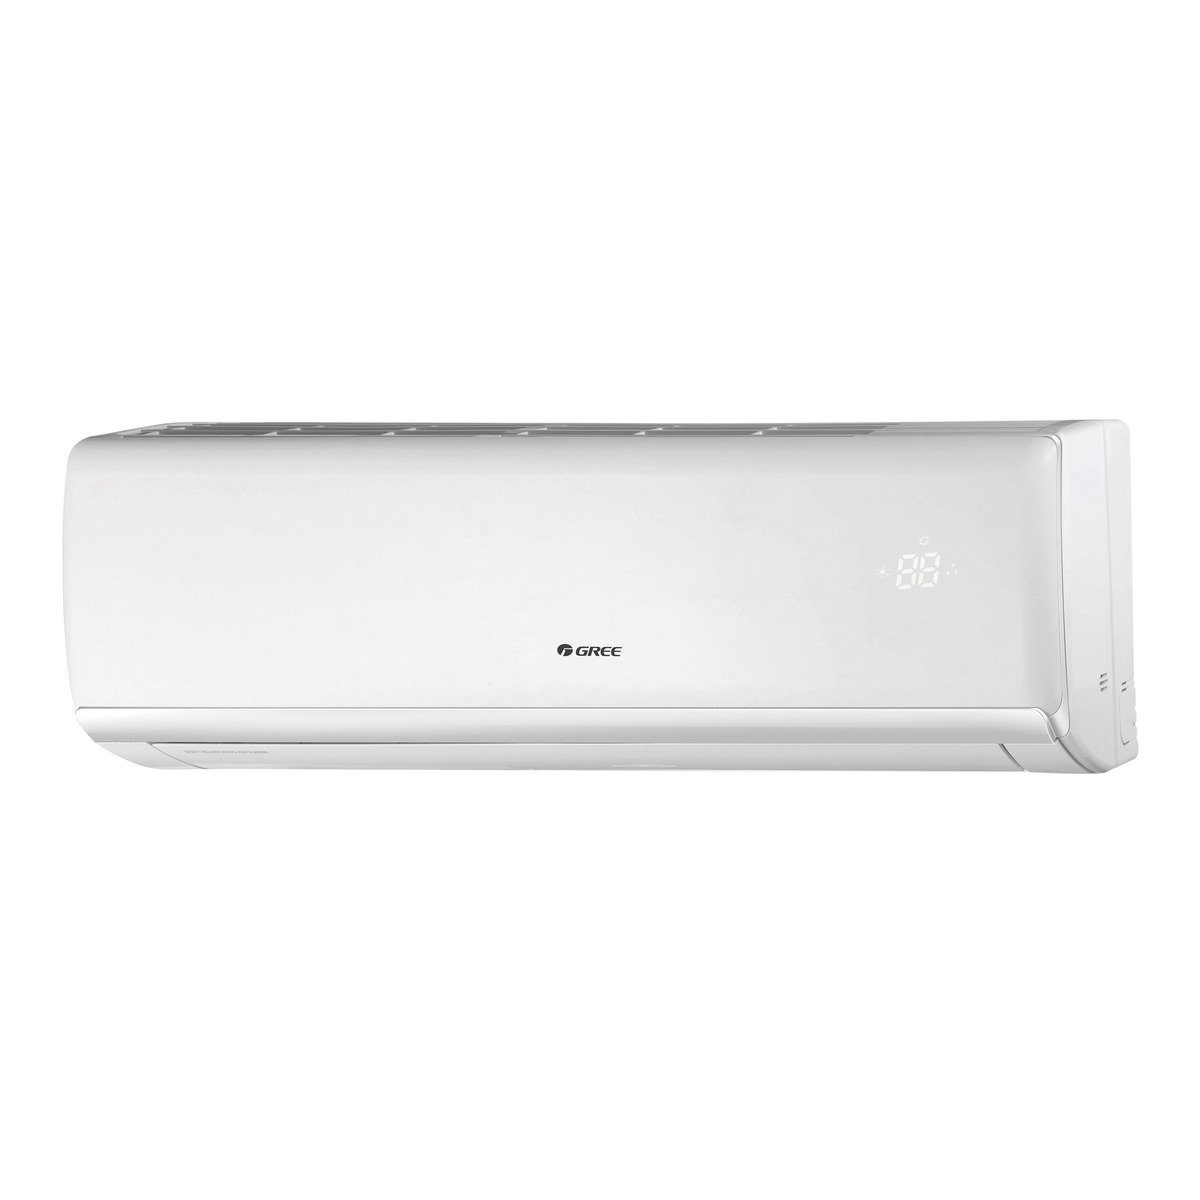 Gree Split Air Conditioner GS24GPRGN 2 Ton